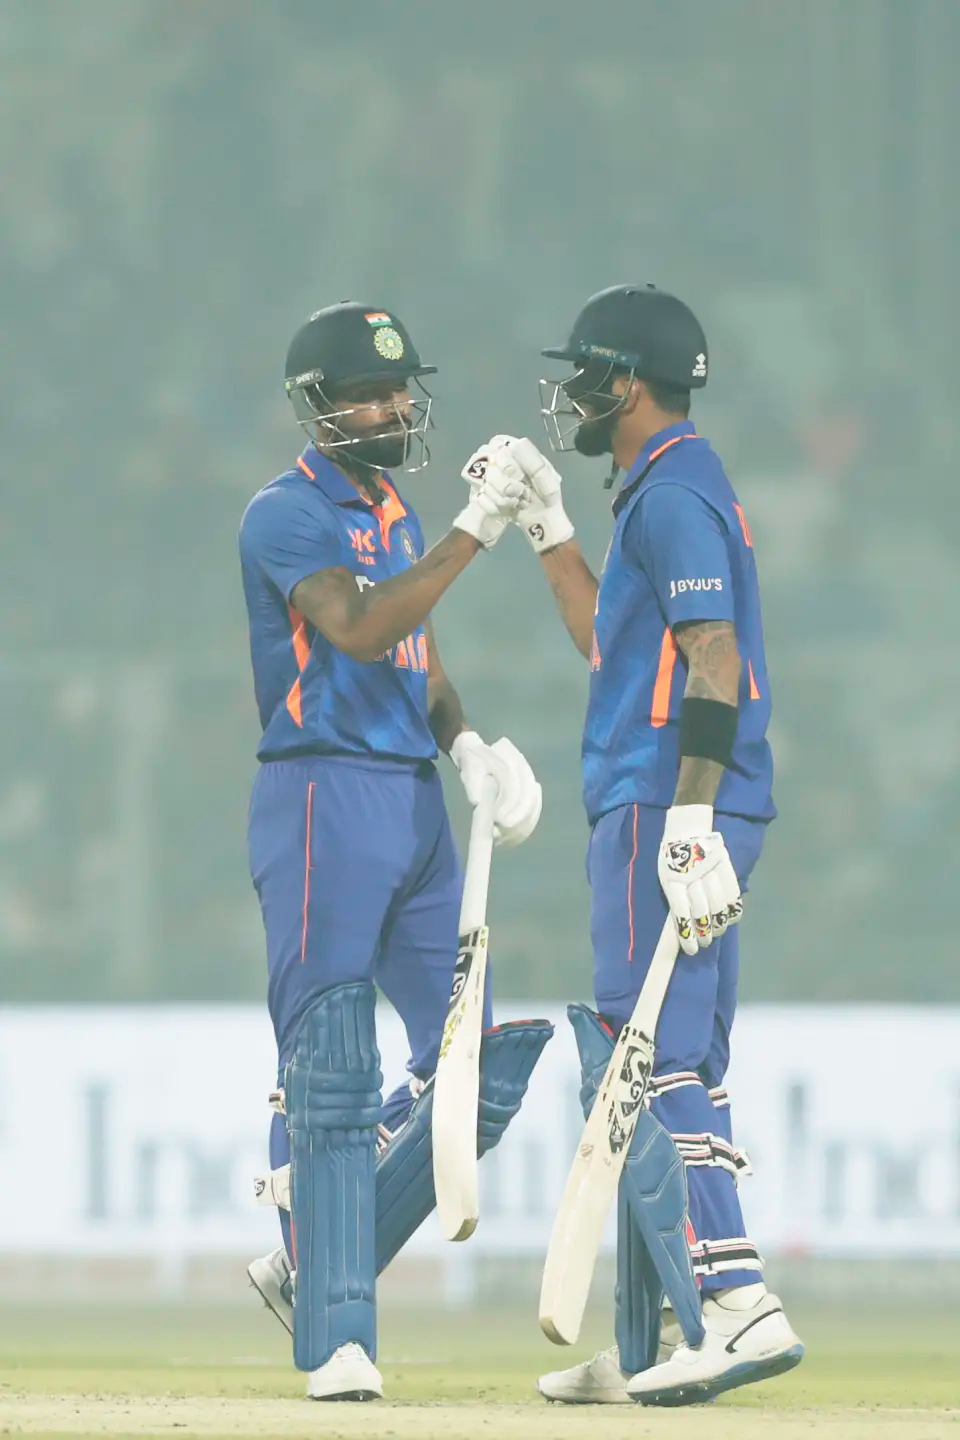 Hardik Pandya and KL Rahul added 75 valuable runs for 5th wicket | BCCI